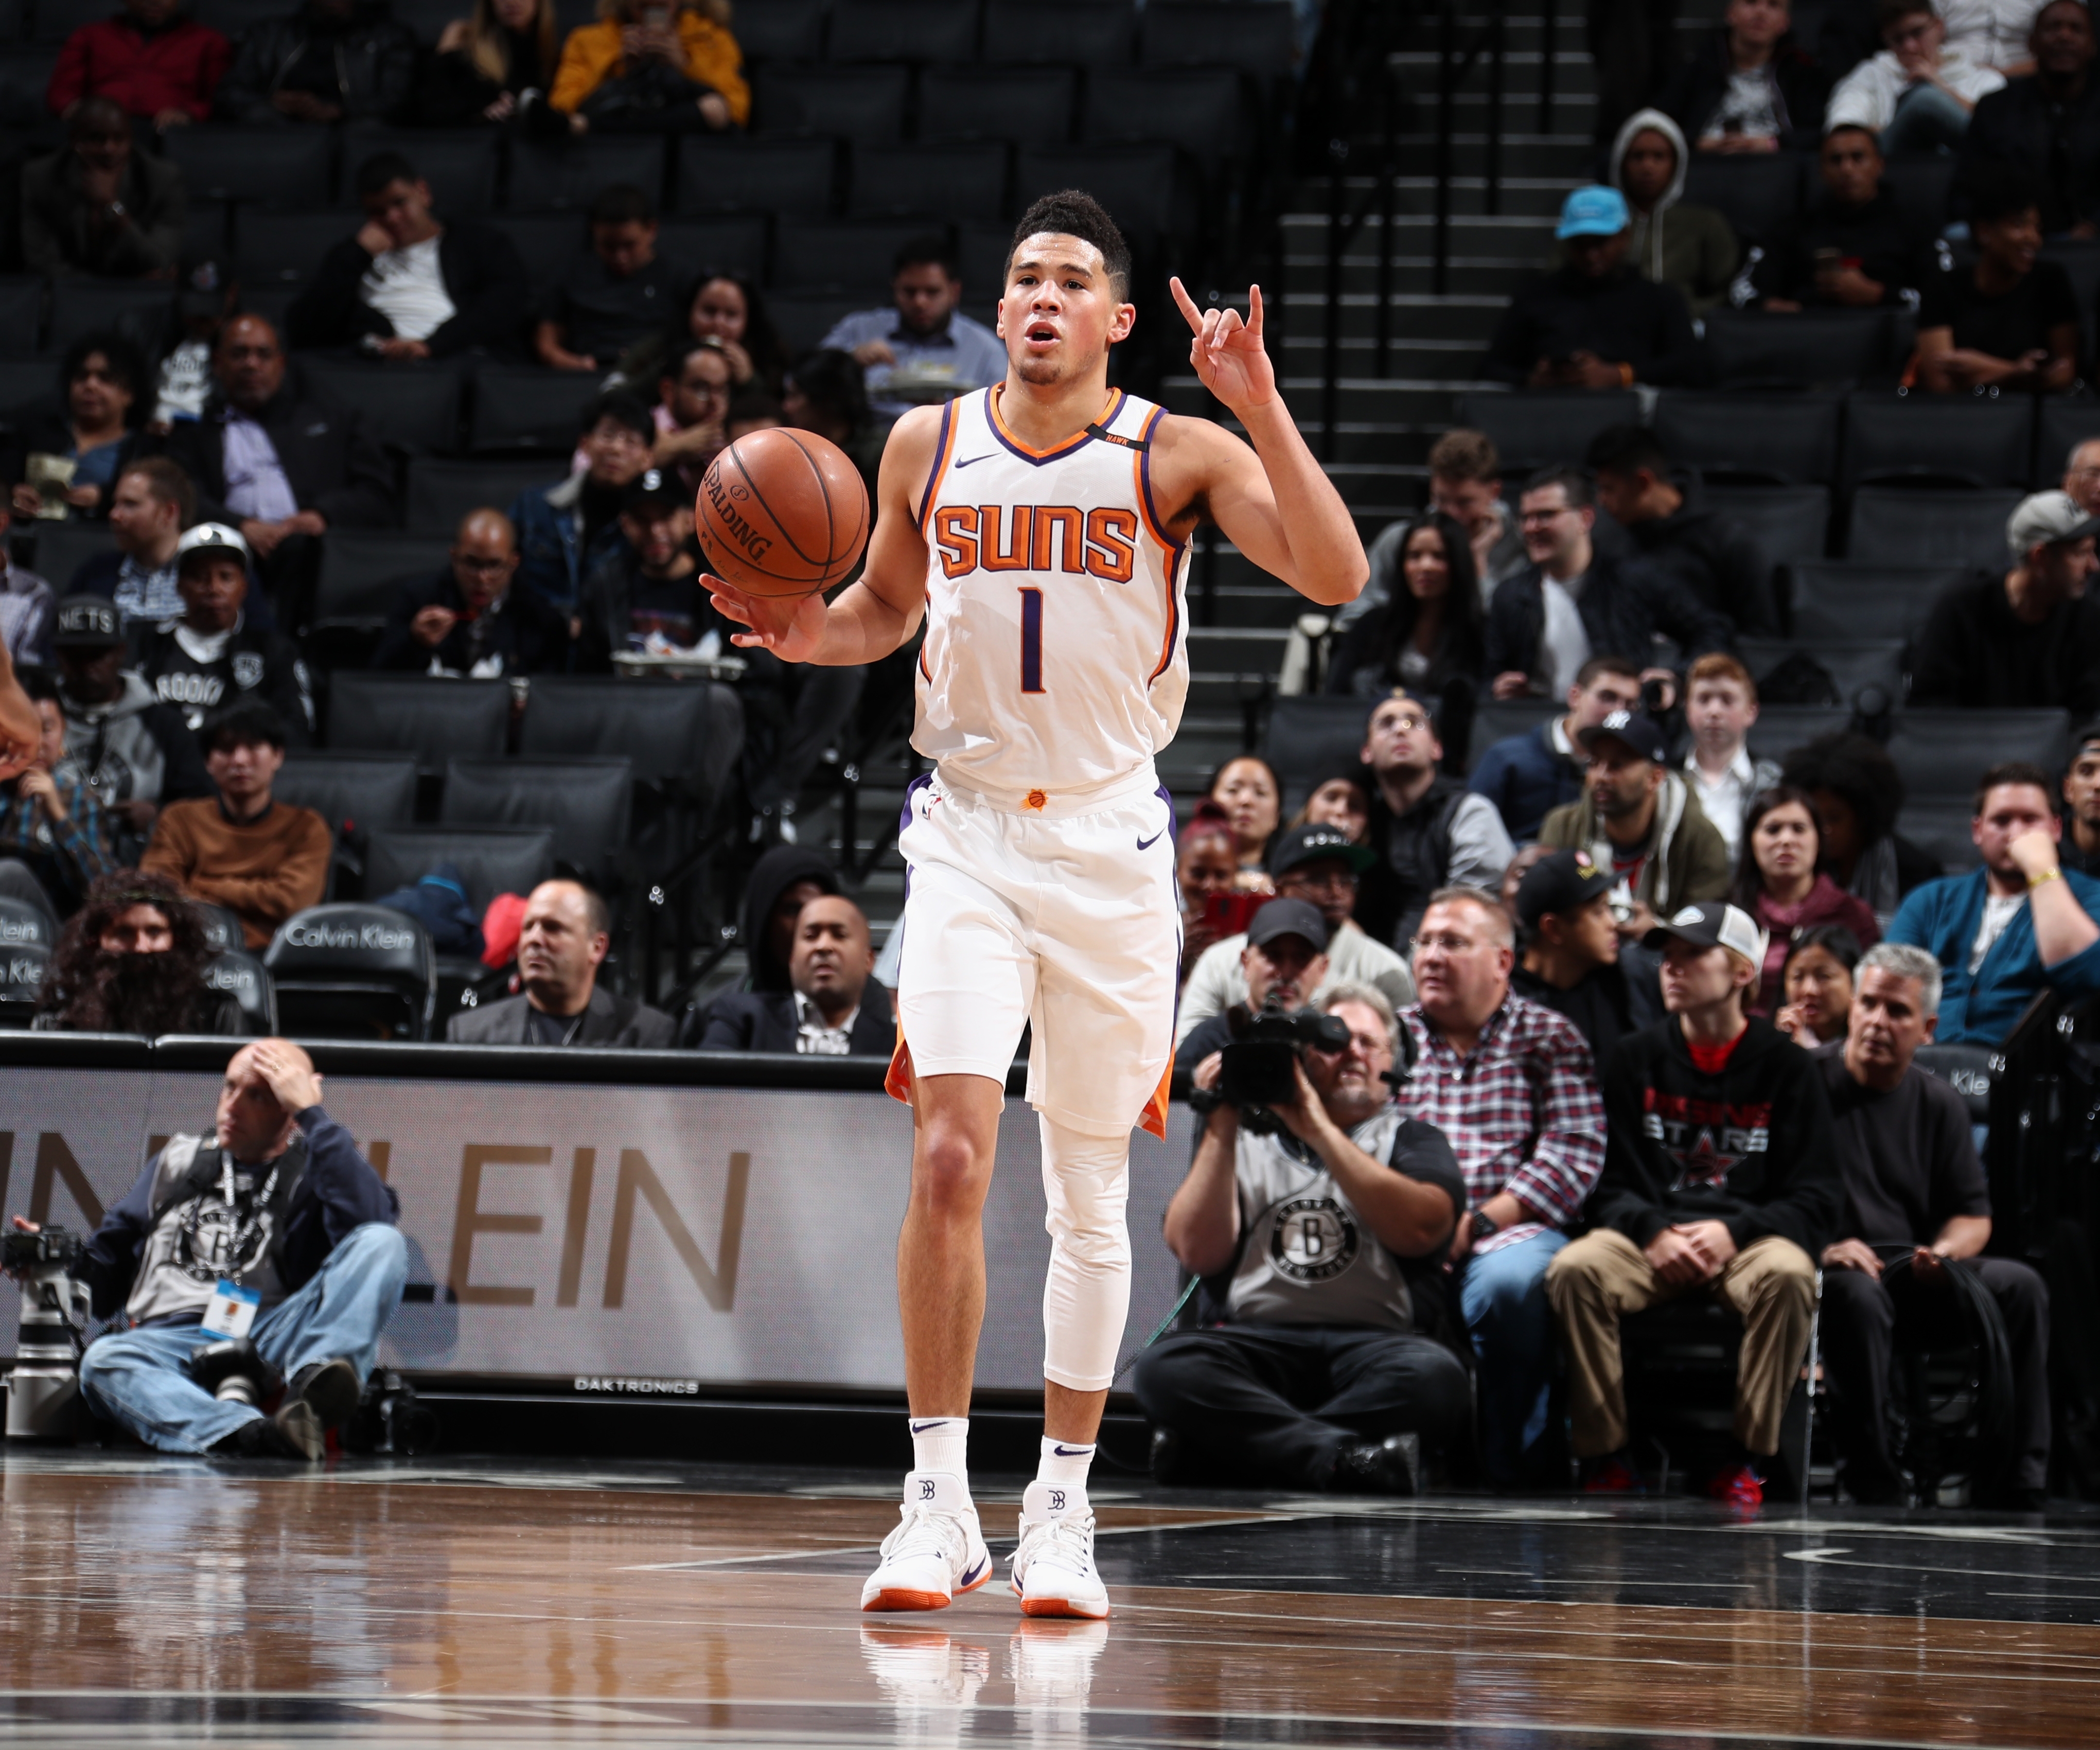 10 Brand-New And Newest Devin Booker Wallpaper Hd for Desktop Computer with...